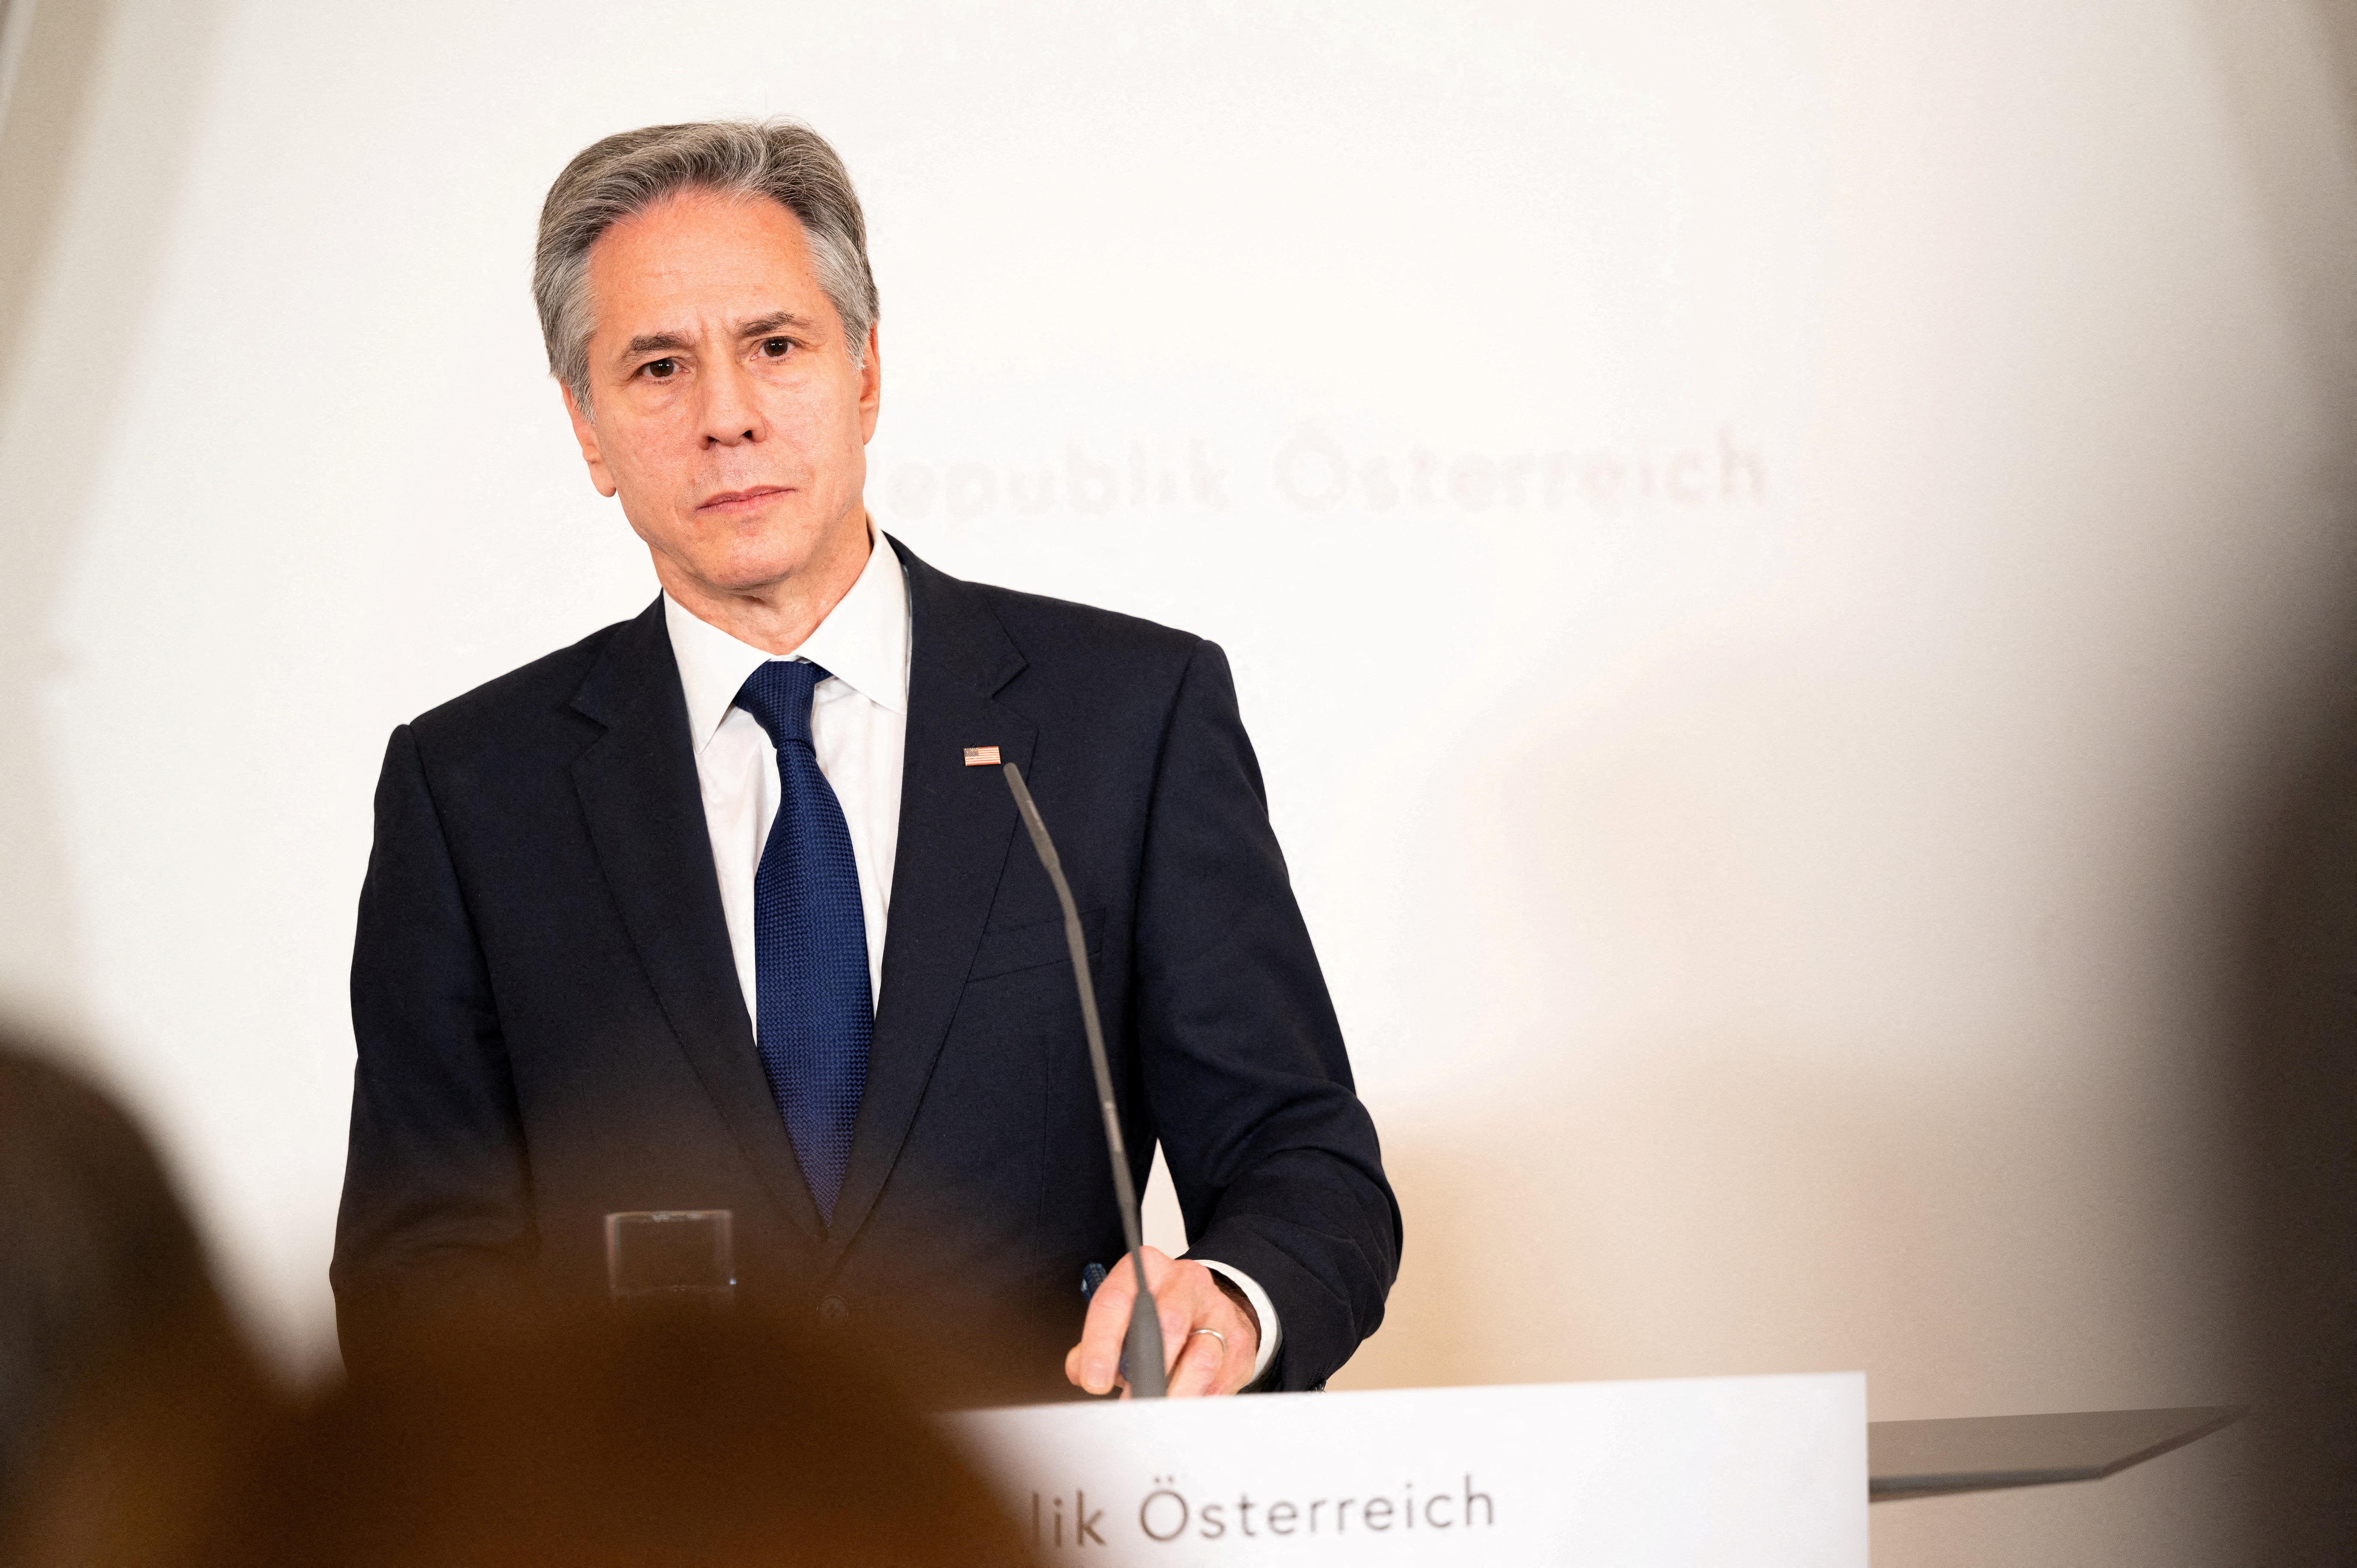 U.S. Secretary of State Antony Blinken at a press conference in Vienna